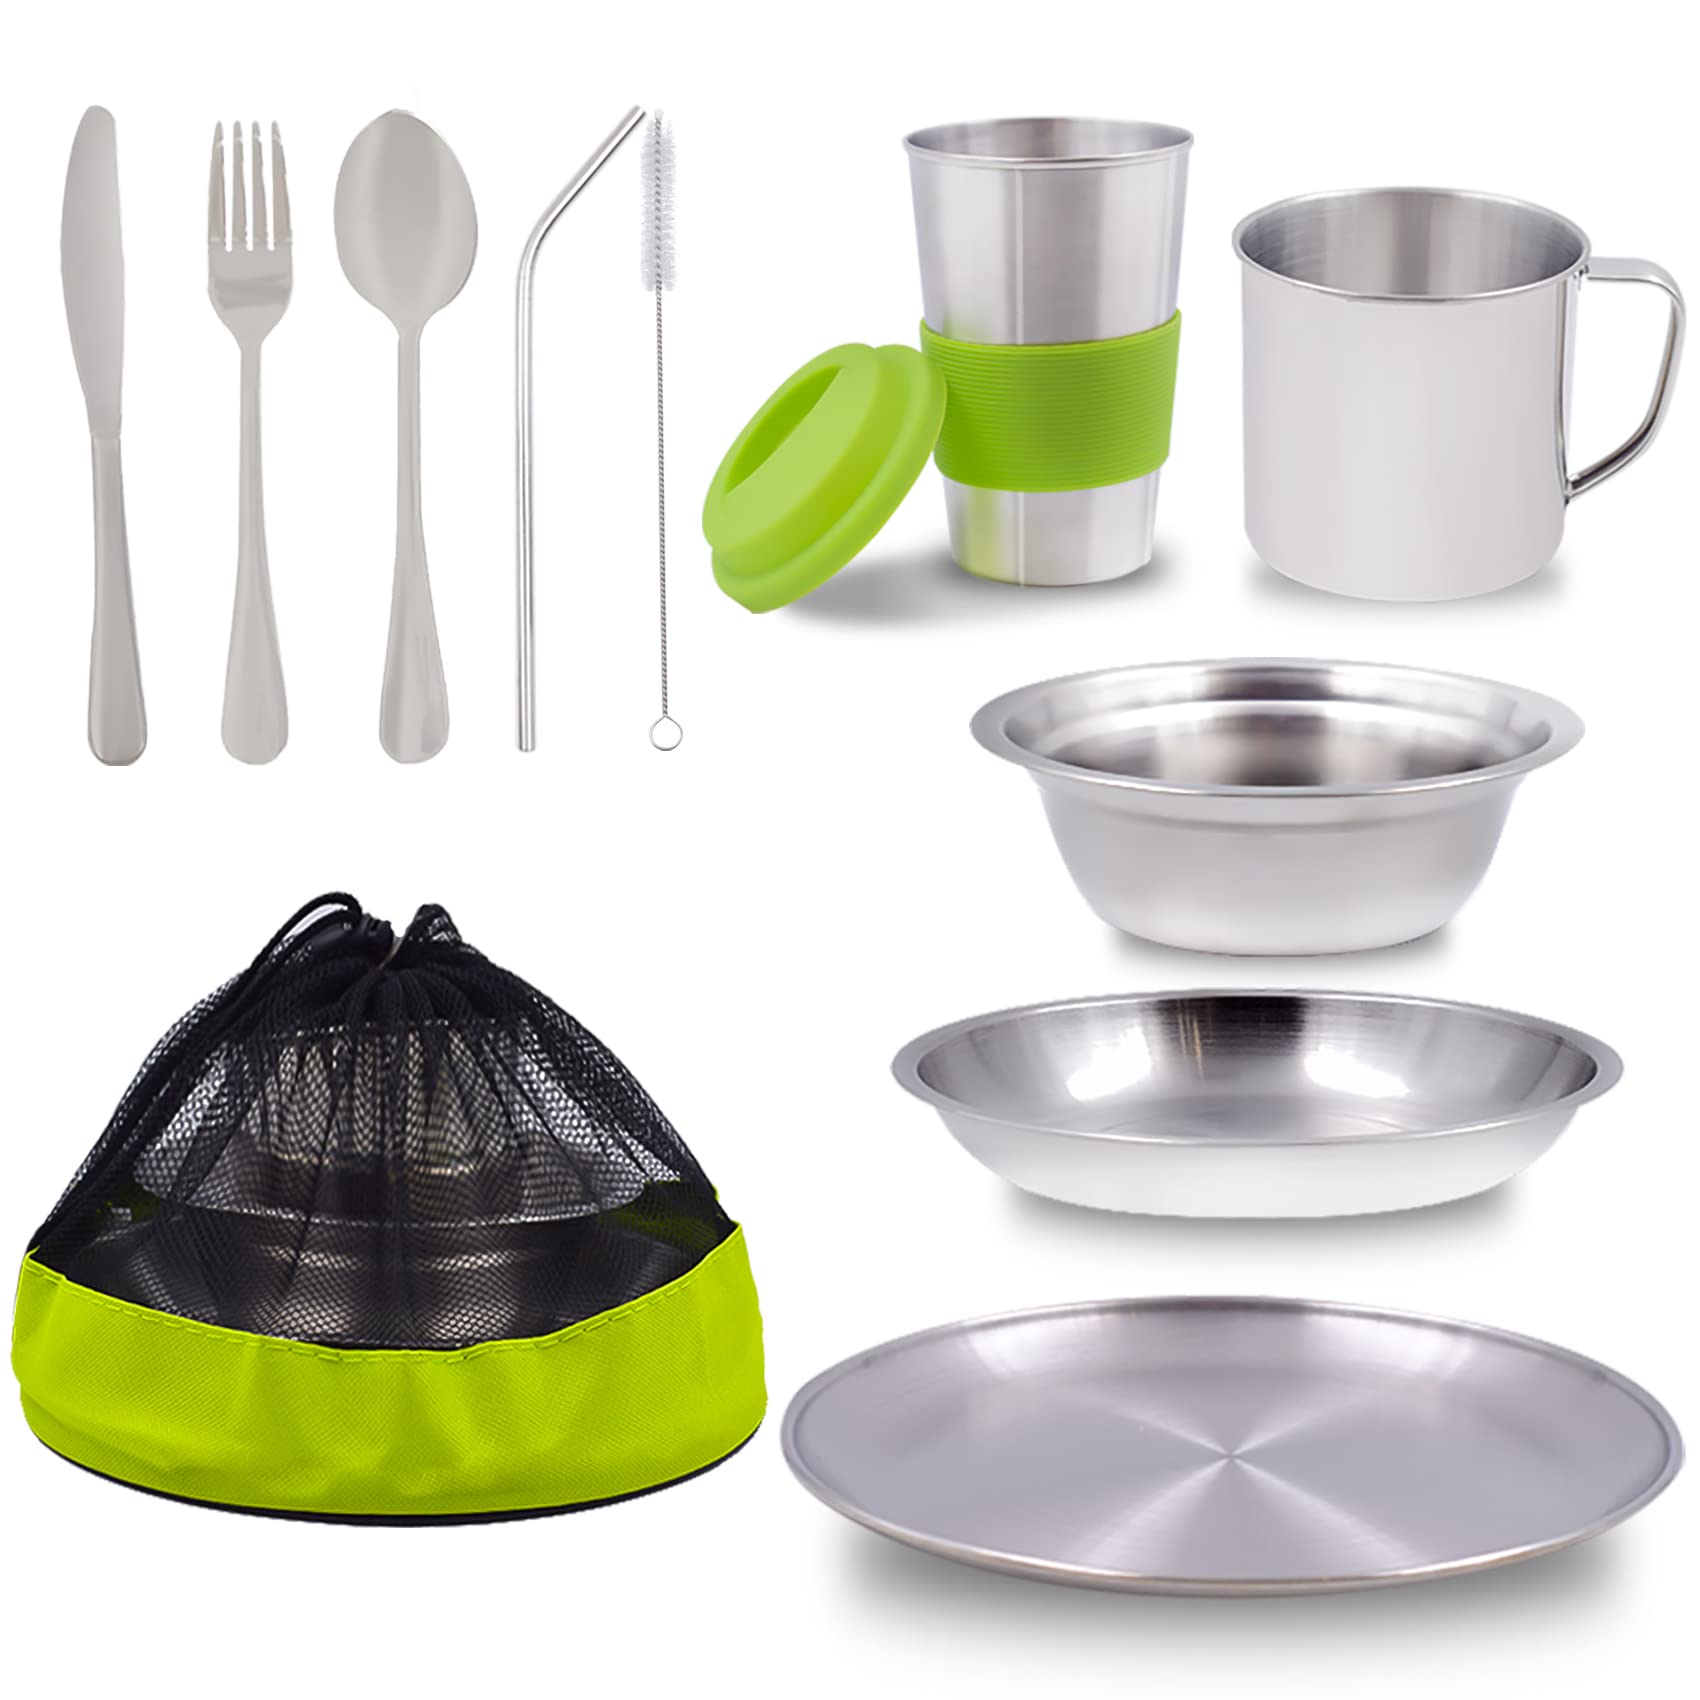 Wealers Unique Complete Messware Kit Polished Stainless Steel Dishes Set| Tableware| Dinnerware| Camping| Buffet| Includes - Cups | Plates| Bowls| Cut